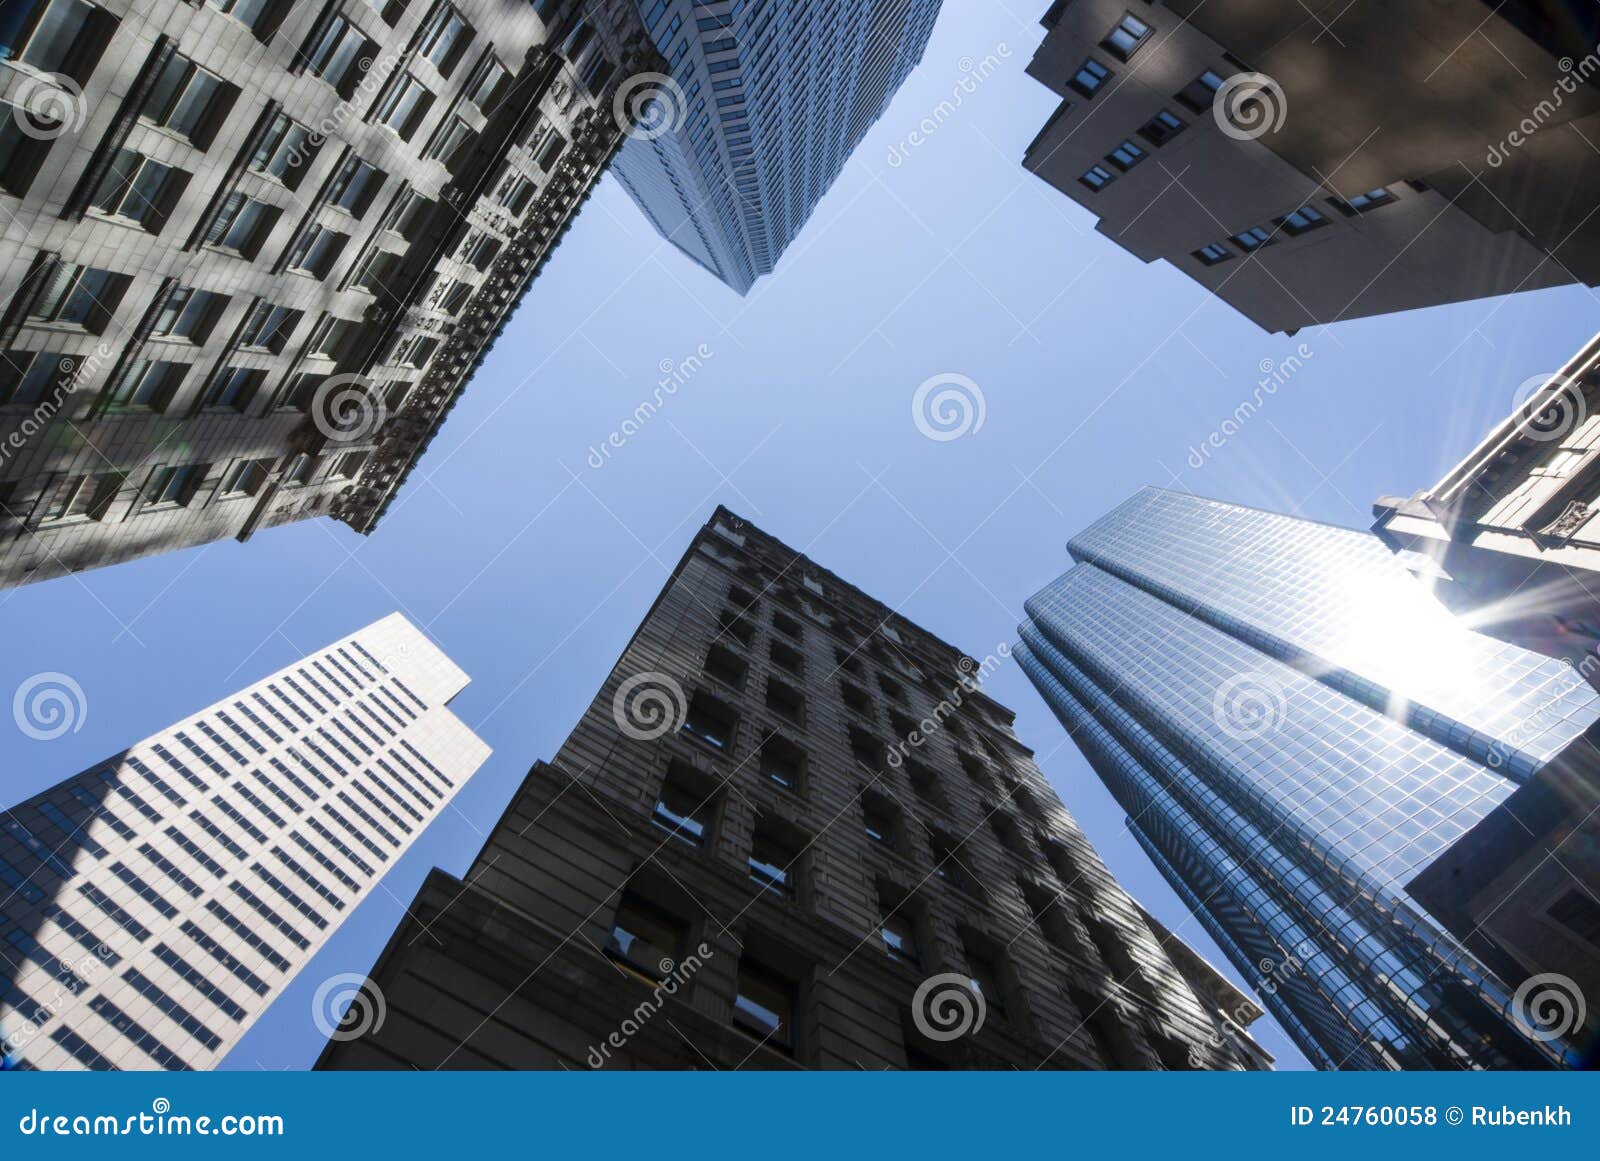 group of tall office buildings